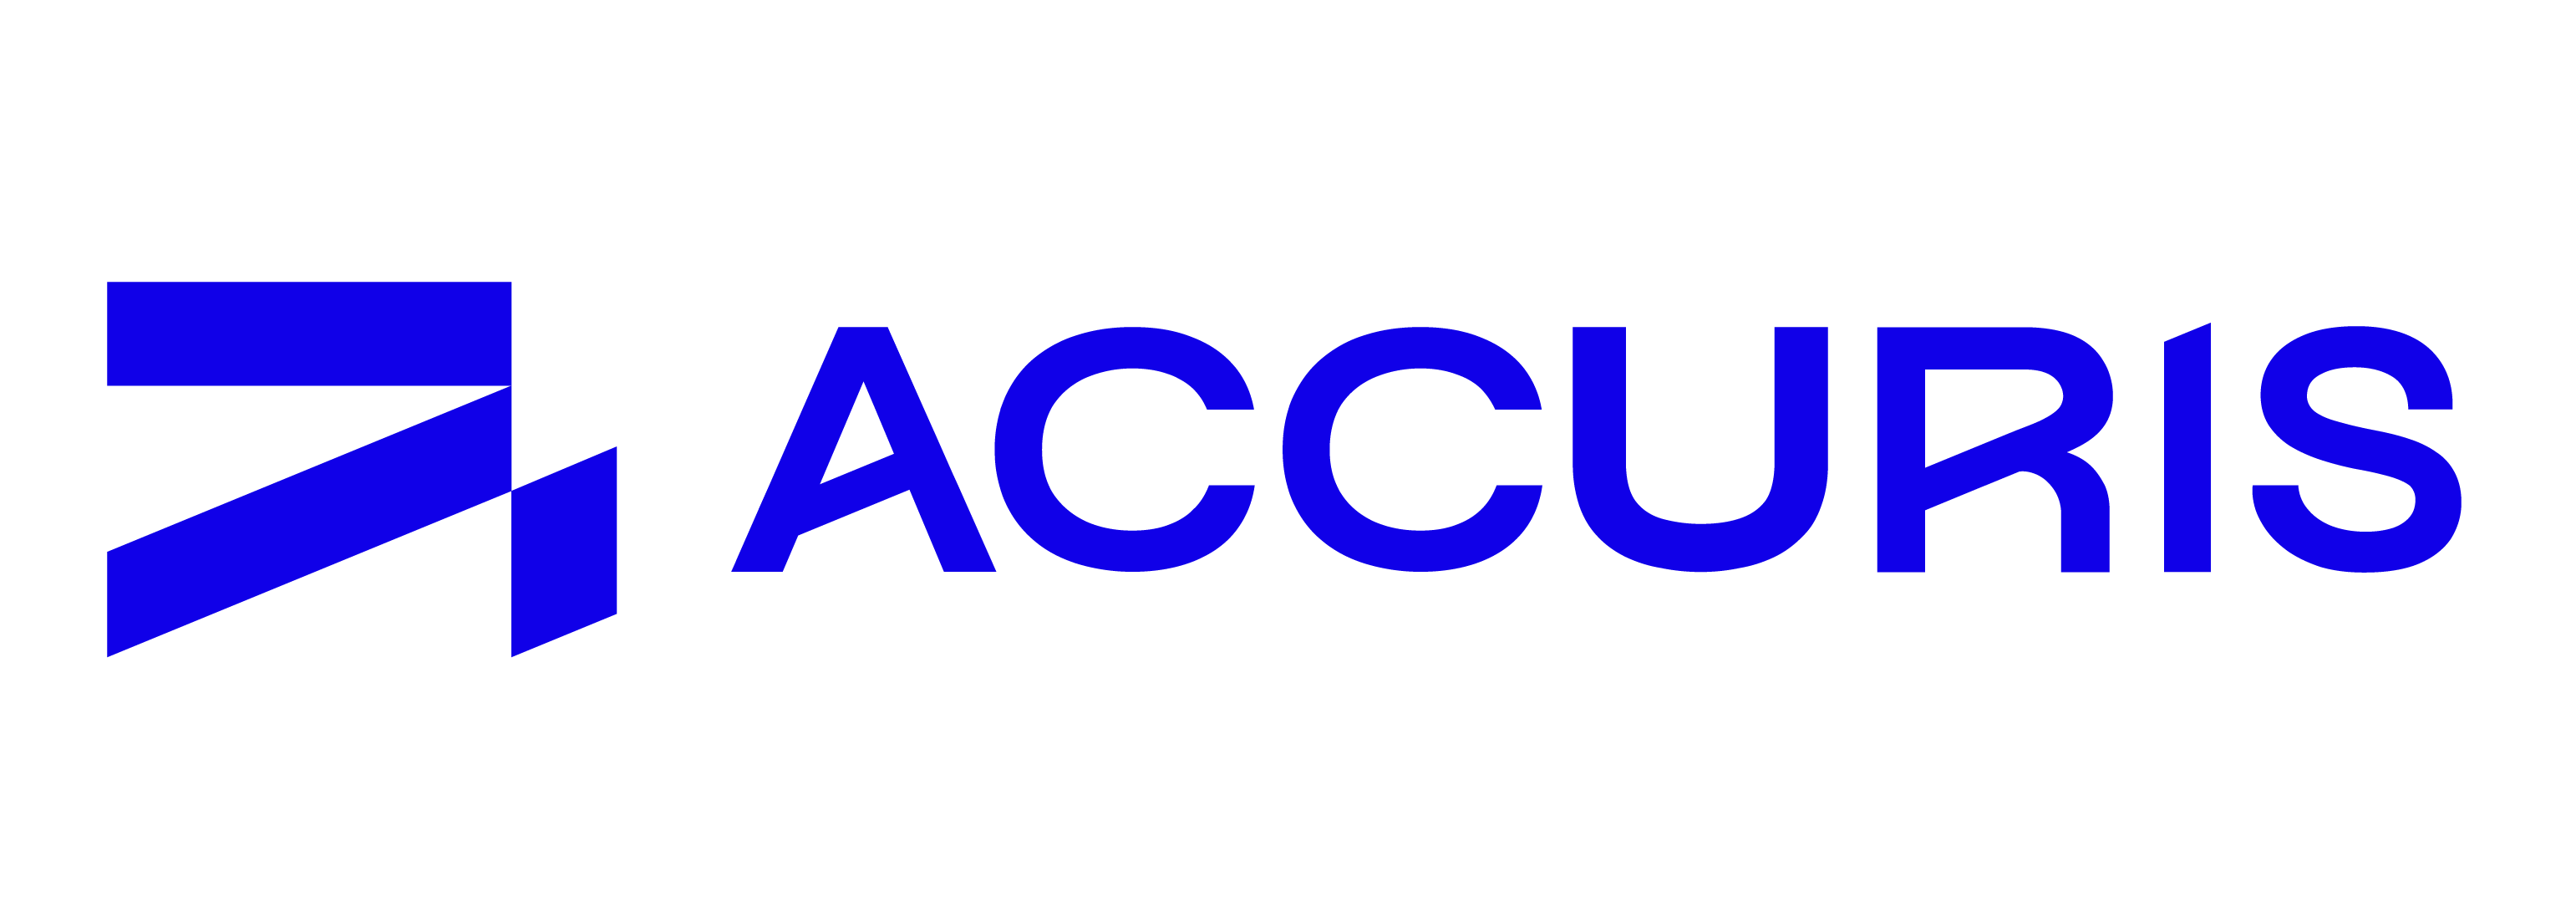 Accuries